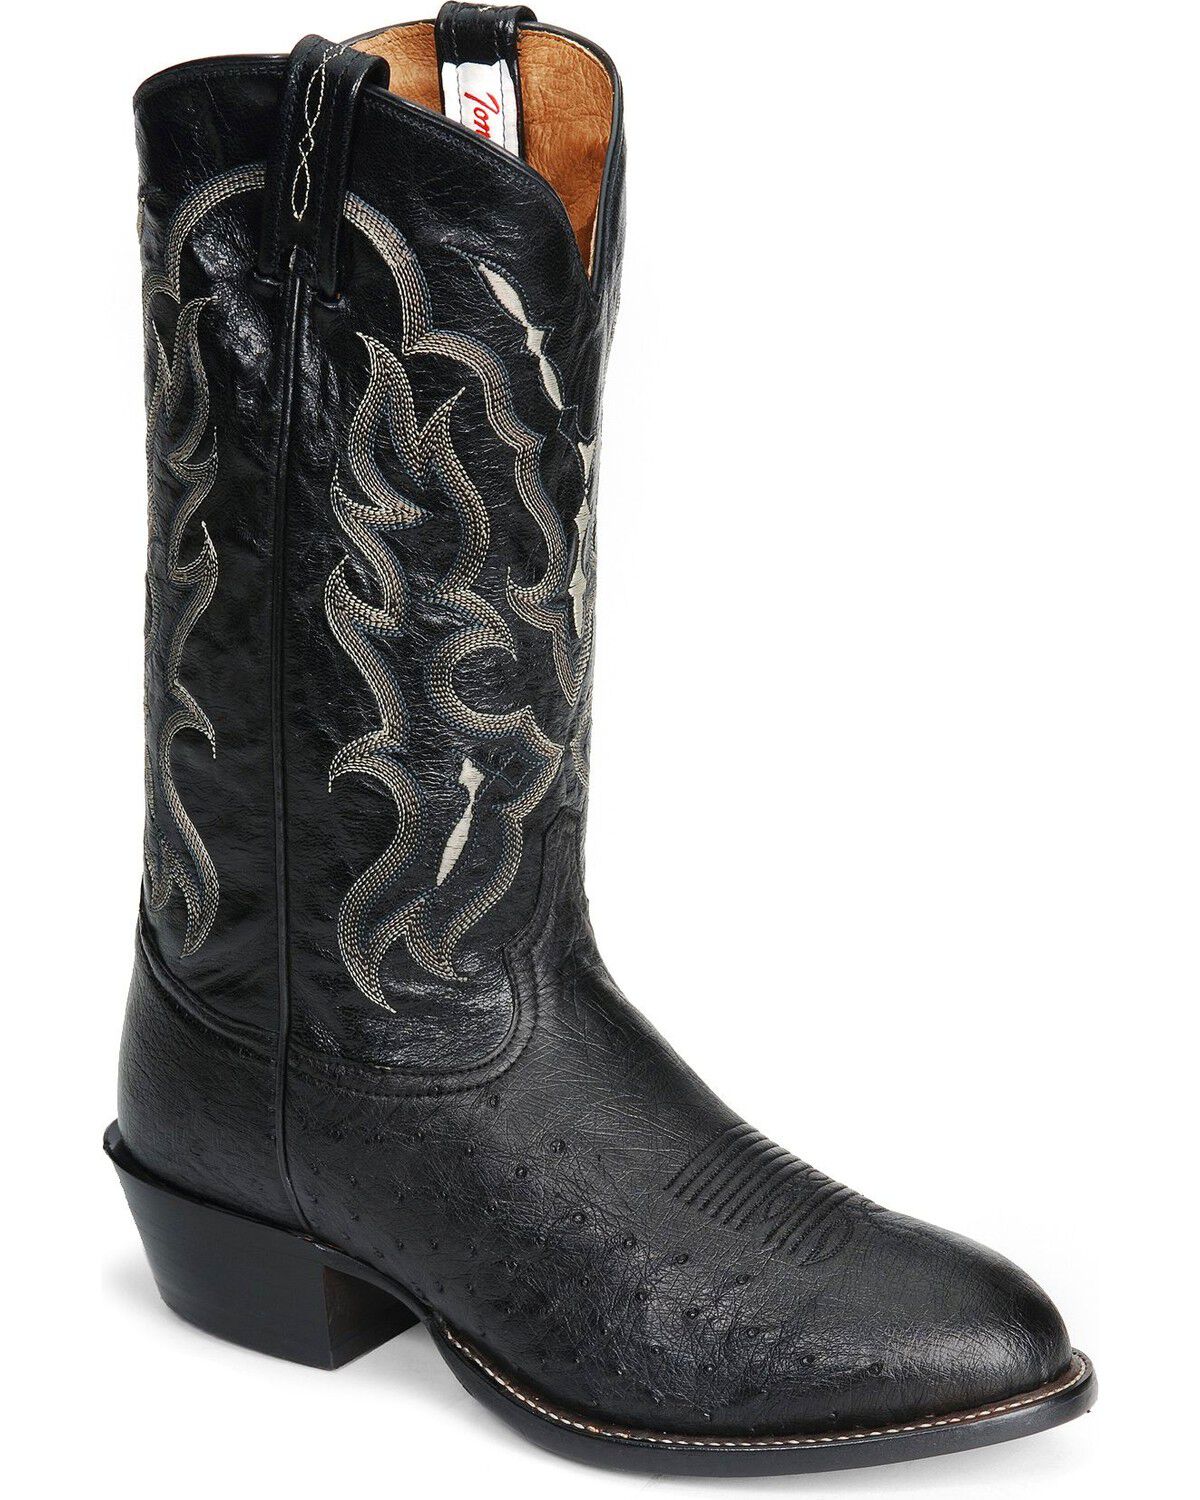 Men's Round Toe Boots - Boot Barn